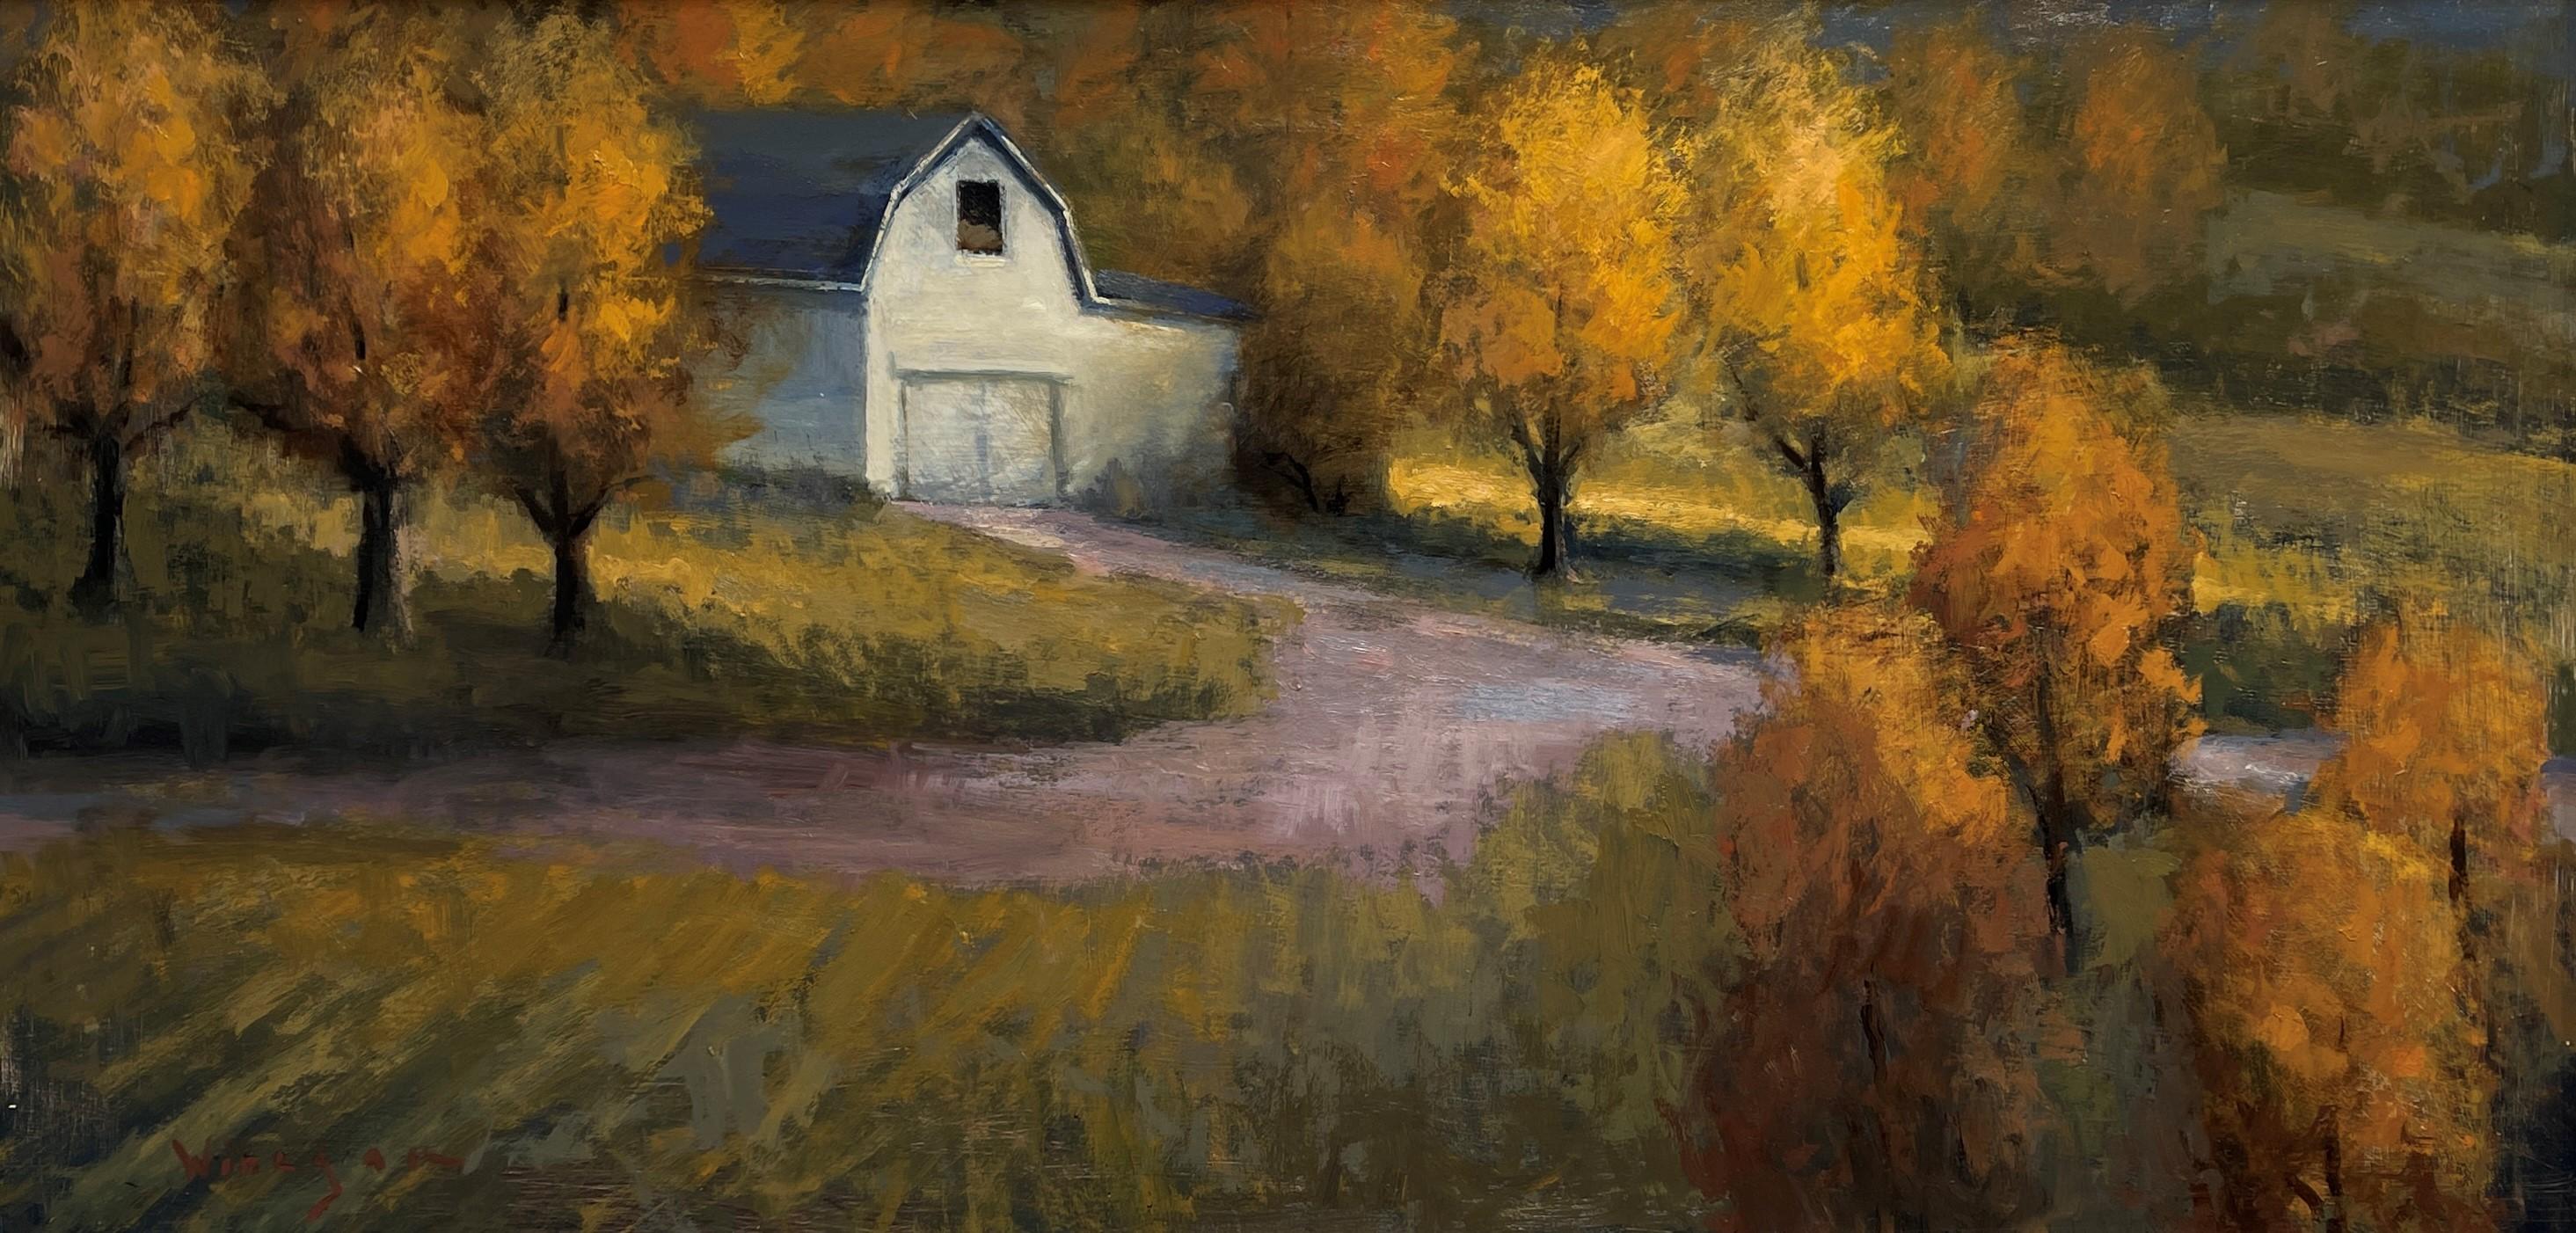 Seth Winegar Landscape Painting - "Autumn Morning" Oil painting